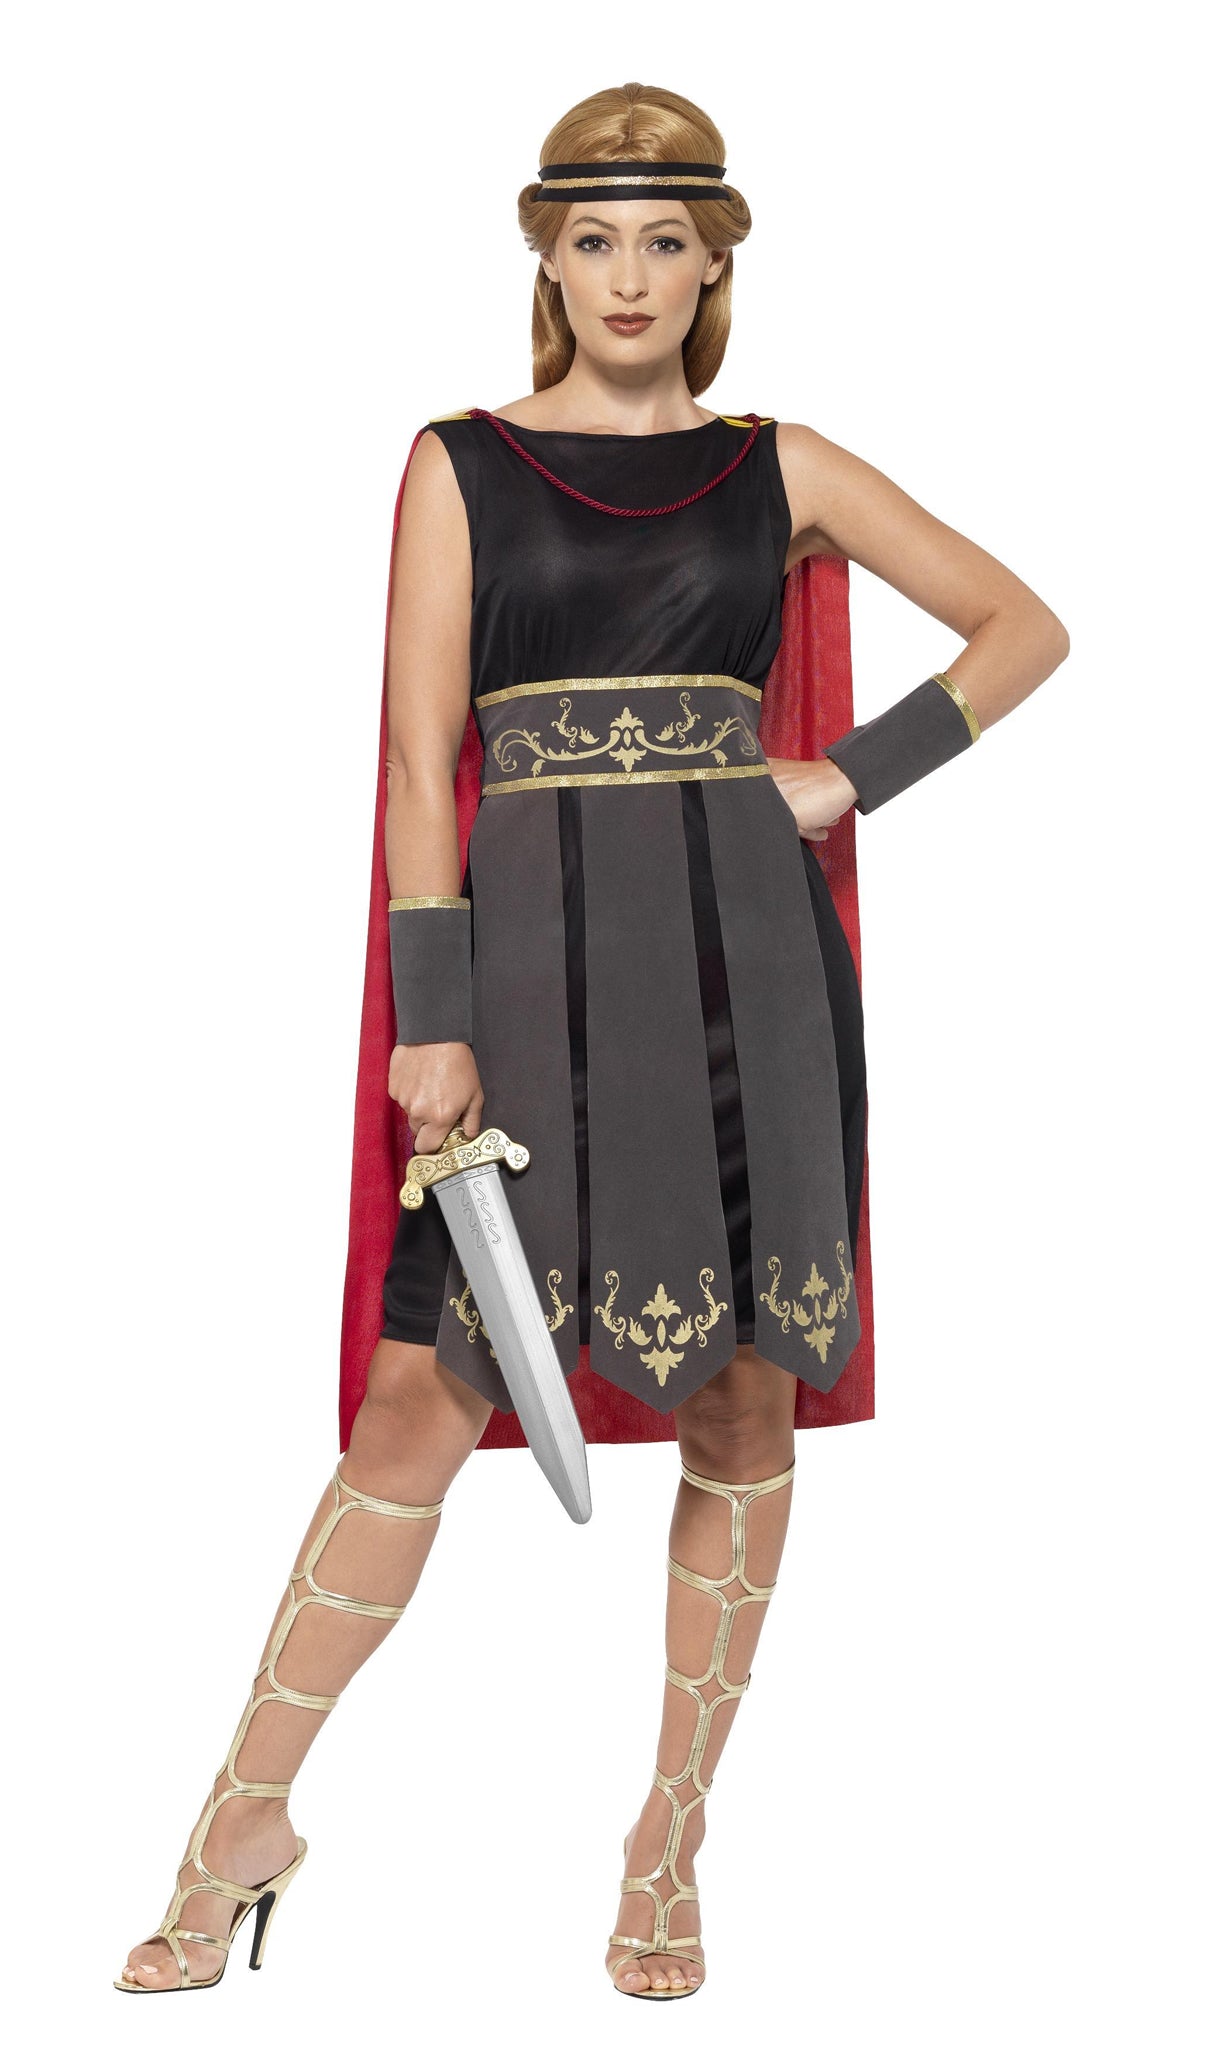 Roman woman's dress with red cape, arm cuffs and headband